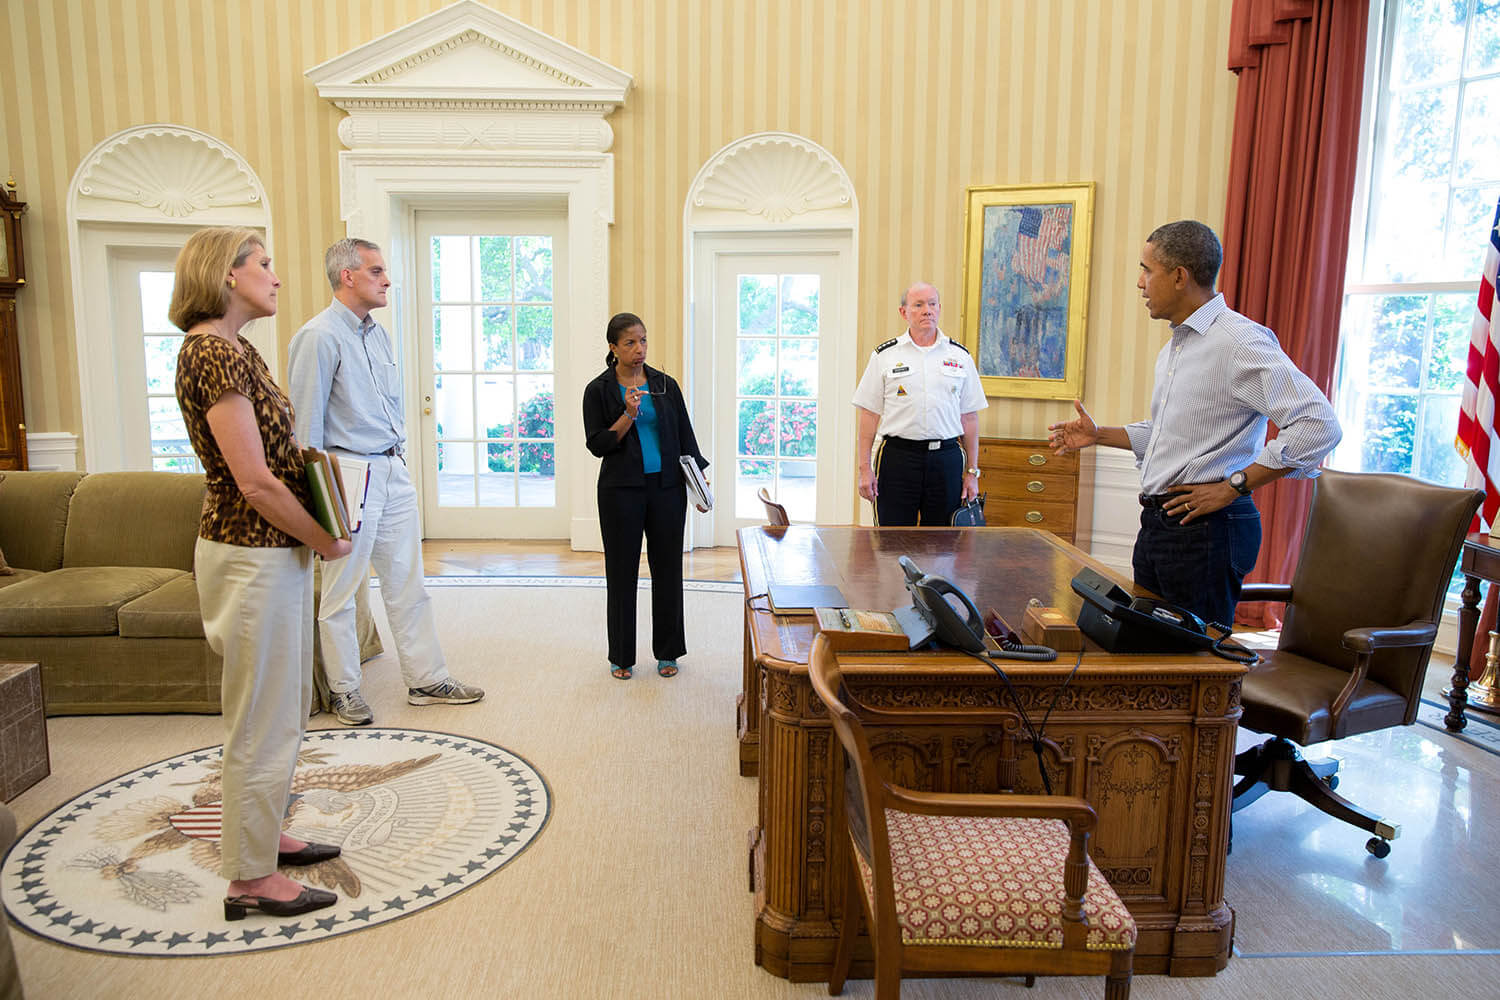 President Barack Obama discusses the situation in Syria with senior advisors in the Oval Office with Karen Donfried on the left. Source: Obama White House / Flickr